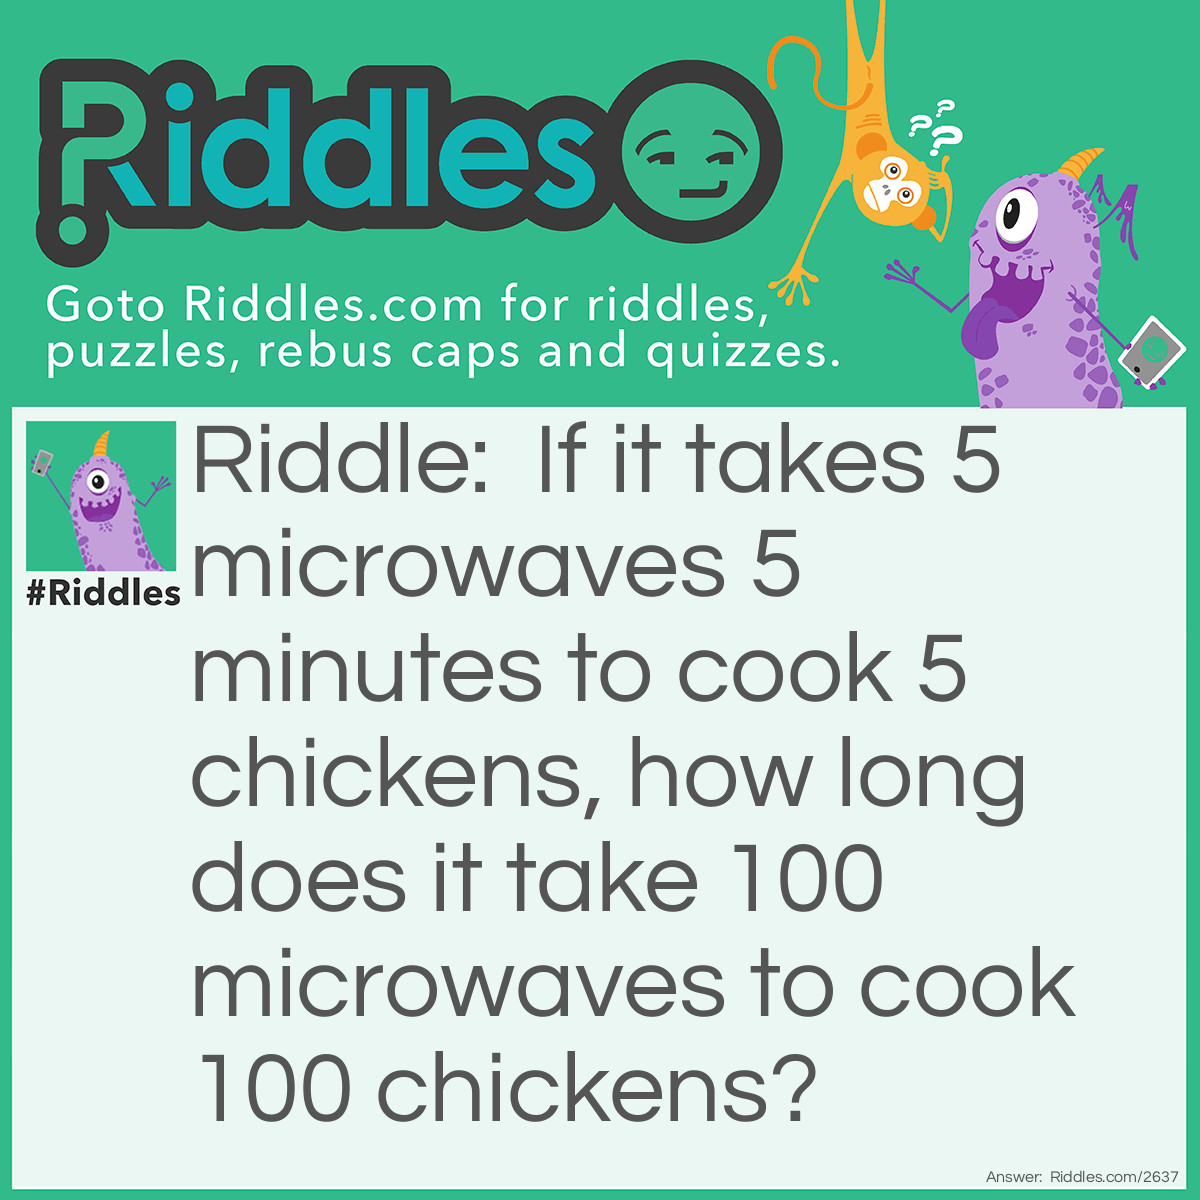 Riddle: If it takes 5 microwaves 5 minutes to cook 5 chickens, how long does it take 100 microwaves to cook 100 chickens? Answer: 5 minutes. We can assume that one chicken is placed in each microwave and that each chicken takes 5 minutes to cook.